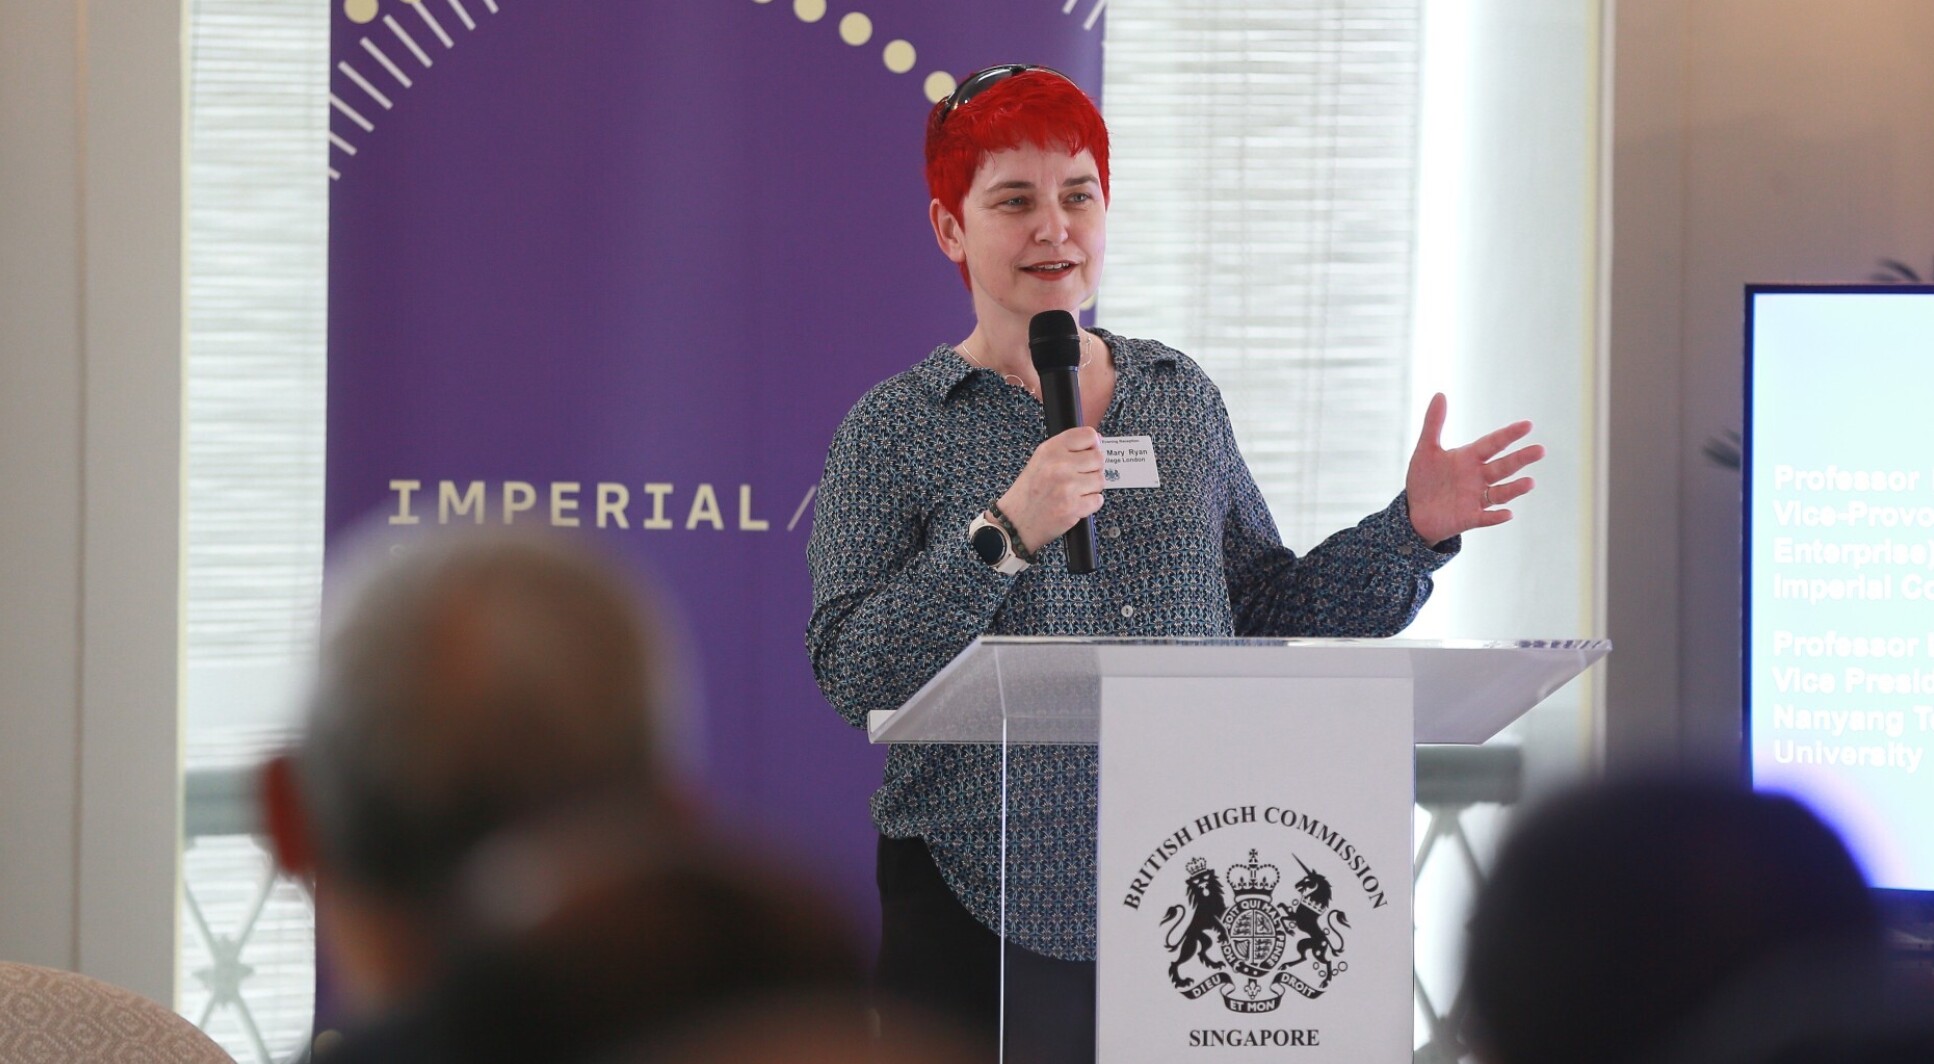 Professor Mary Ryan at the launch event for Imperial Global: Singapore.